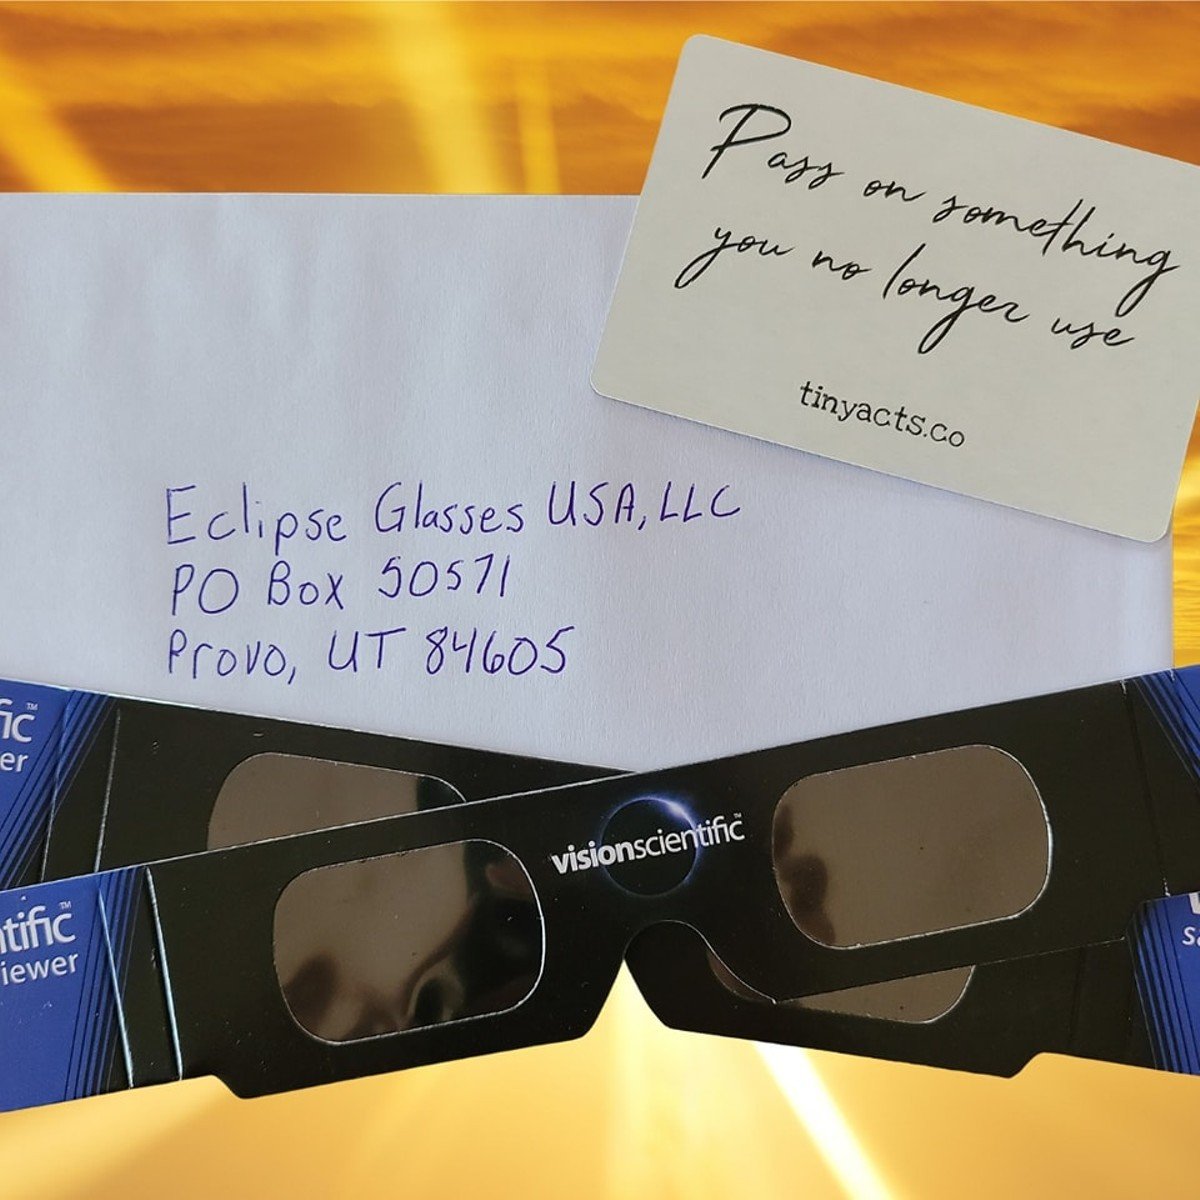 Enjoy the eclipse? Send on your sunglasses for others to enjoy.